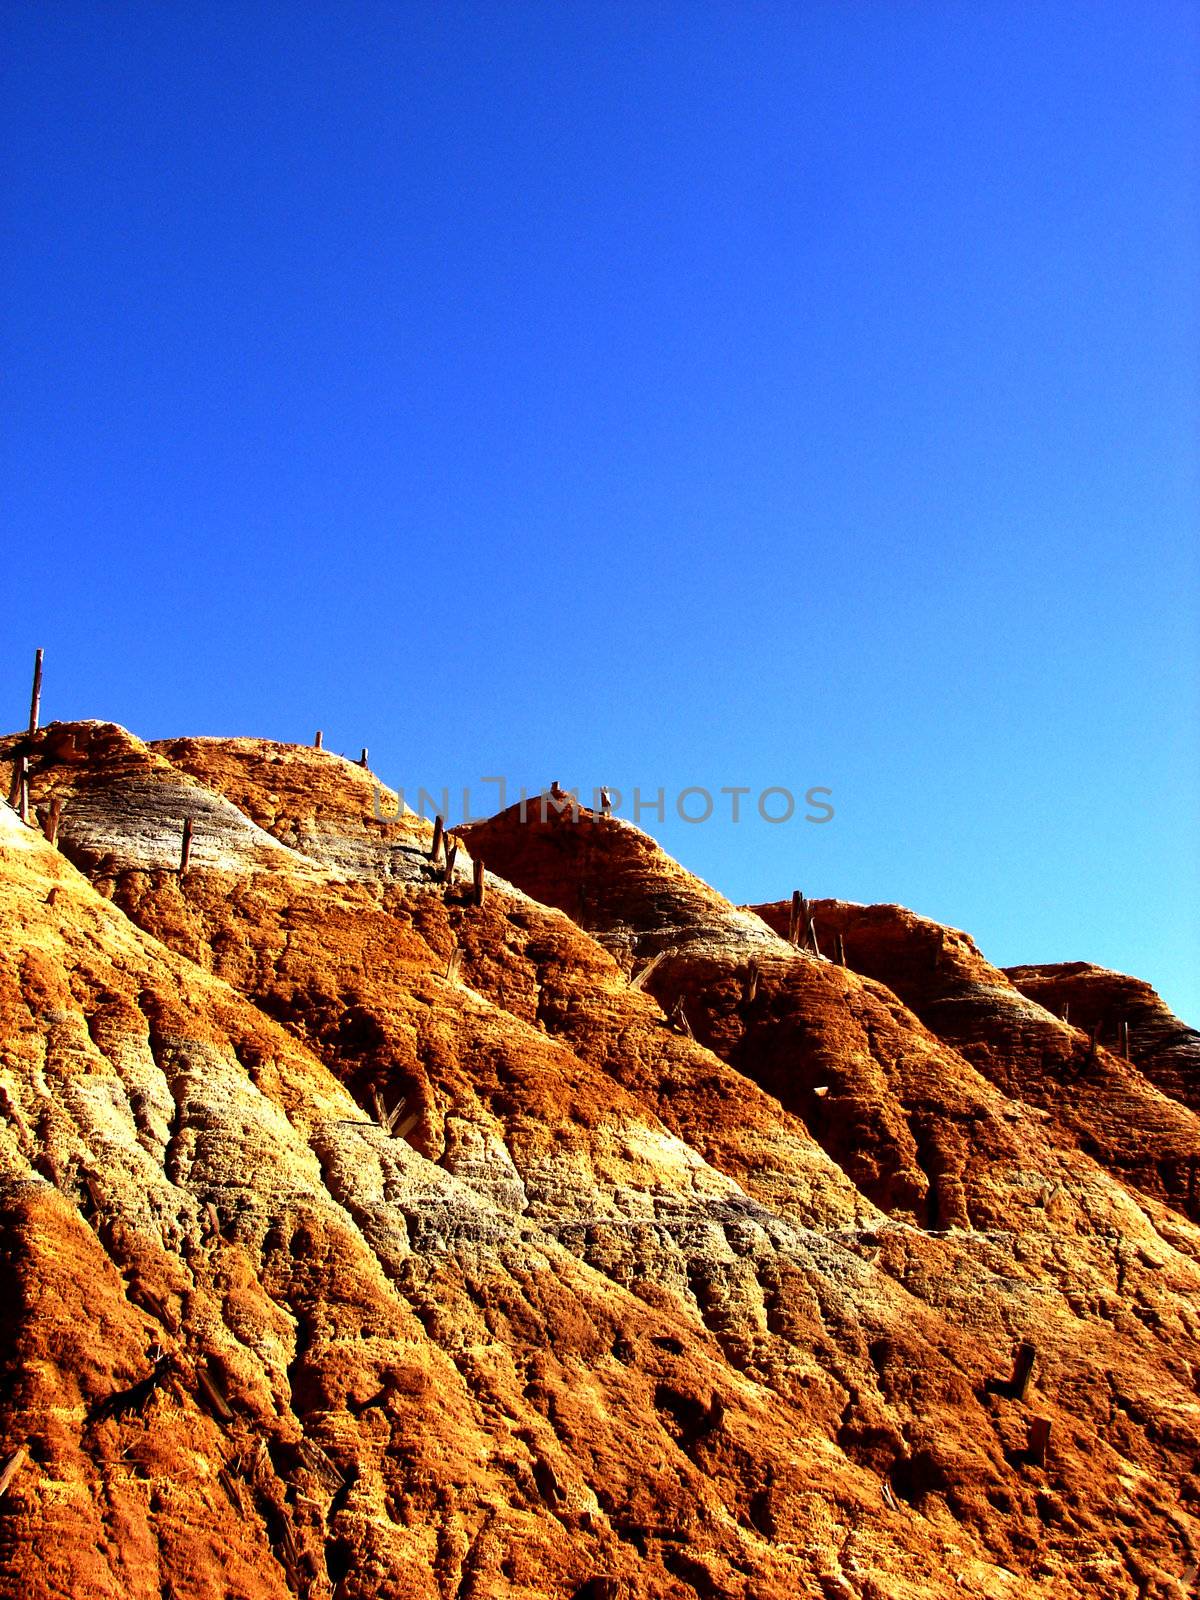 Deserted copper mine on a blue sky background